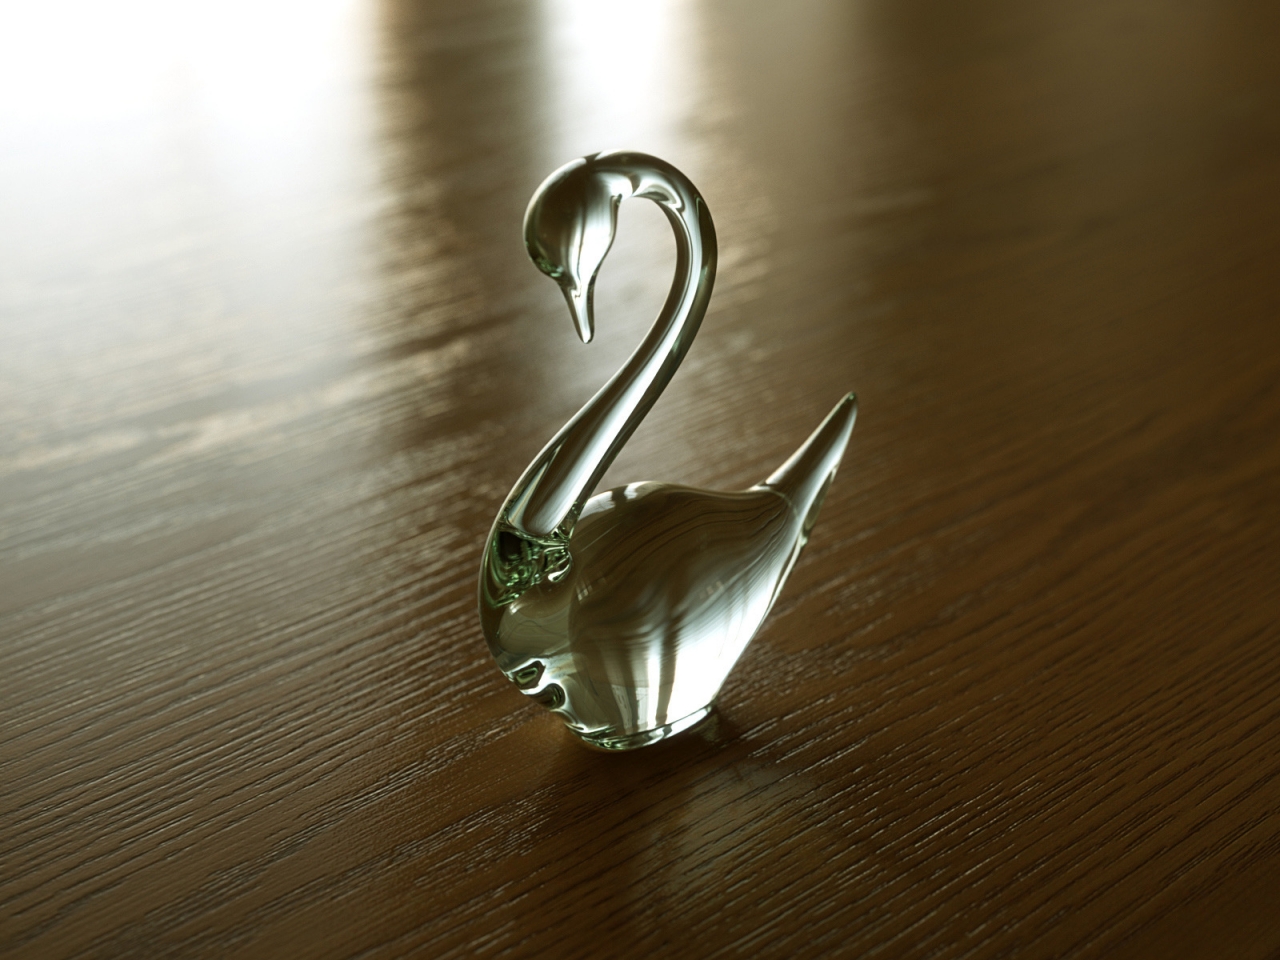 Glass Swan for 1280 x 960 resolution